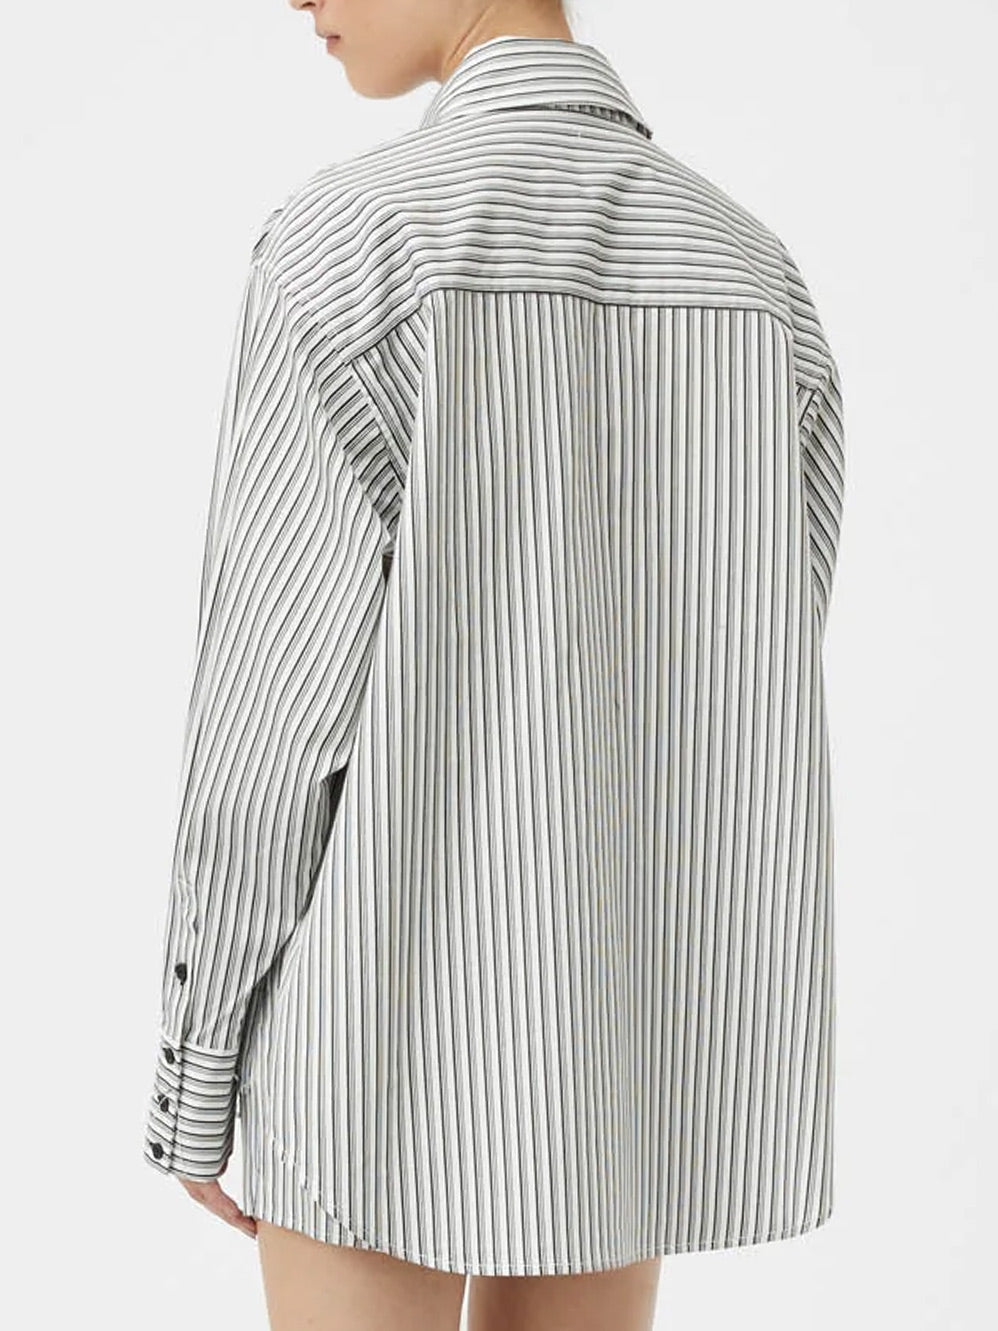 CAMILLA AND MARC ELSING STRIPED SHIRT